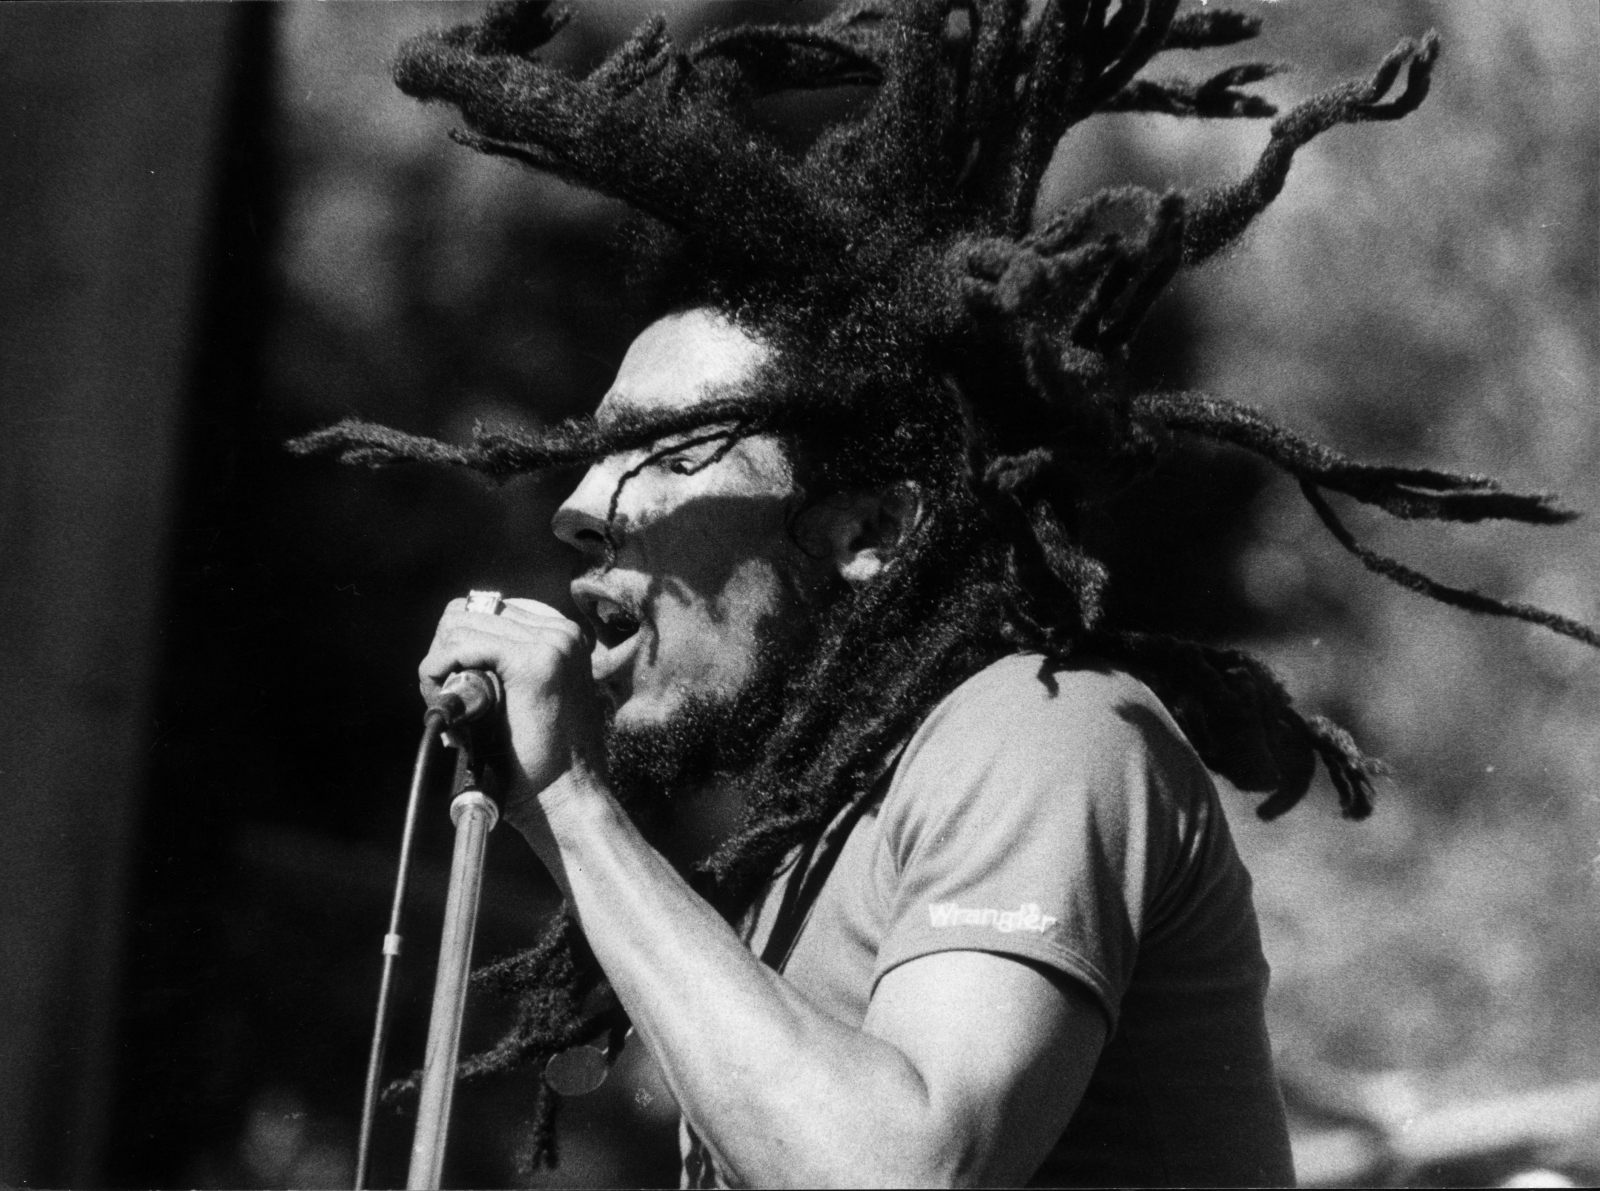 Bob Marley Day 2015: 10 facts about the global reggae icon on his 70th birthday